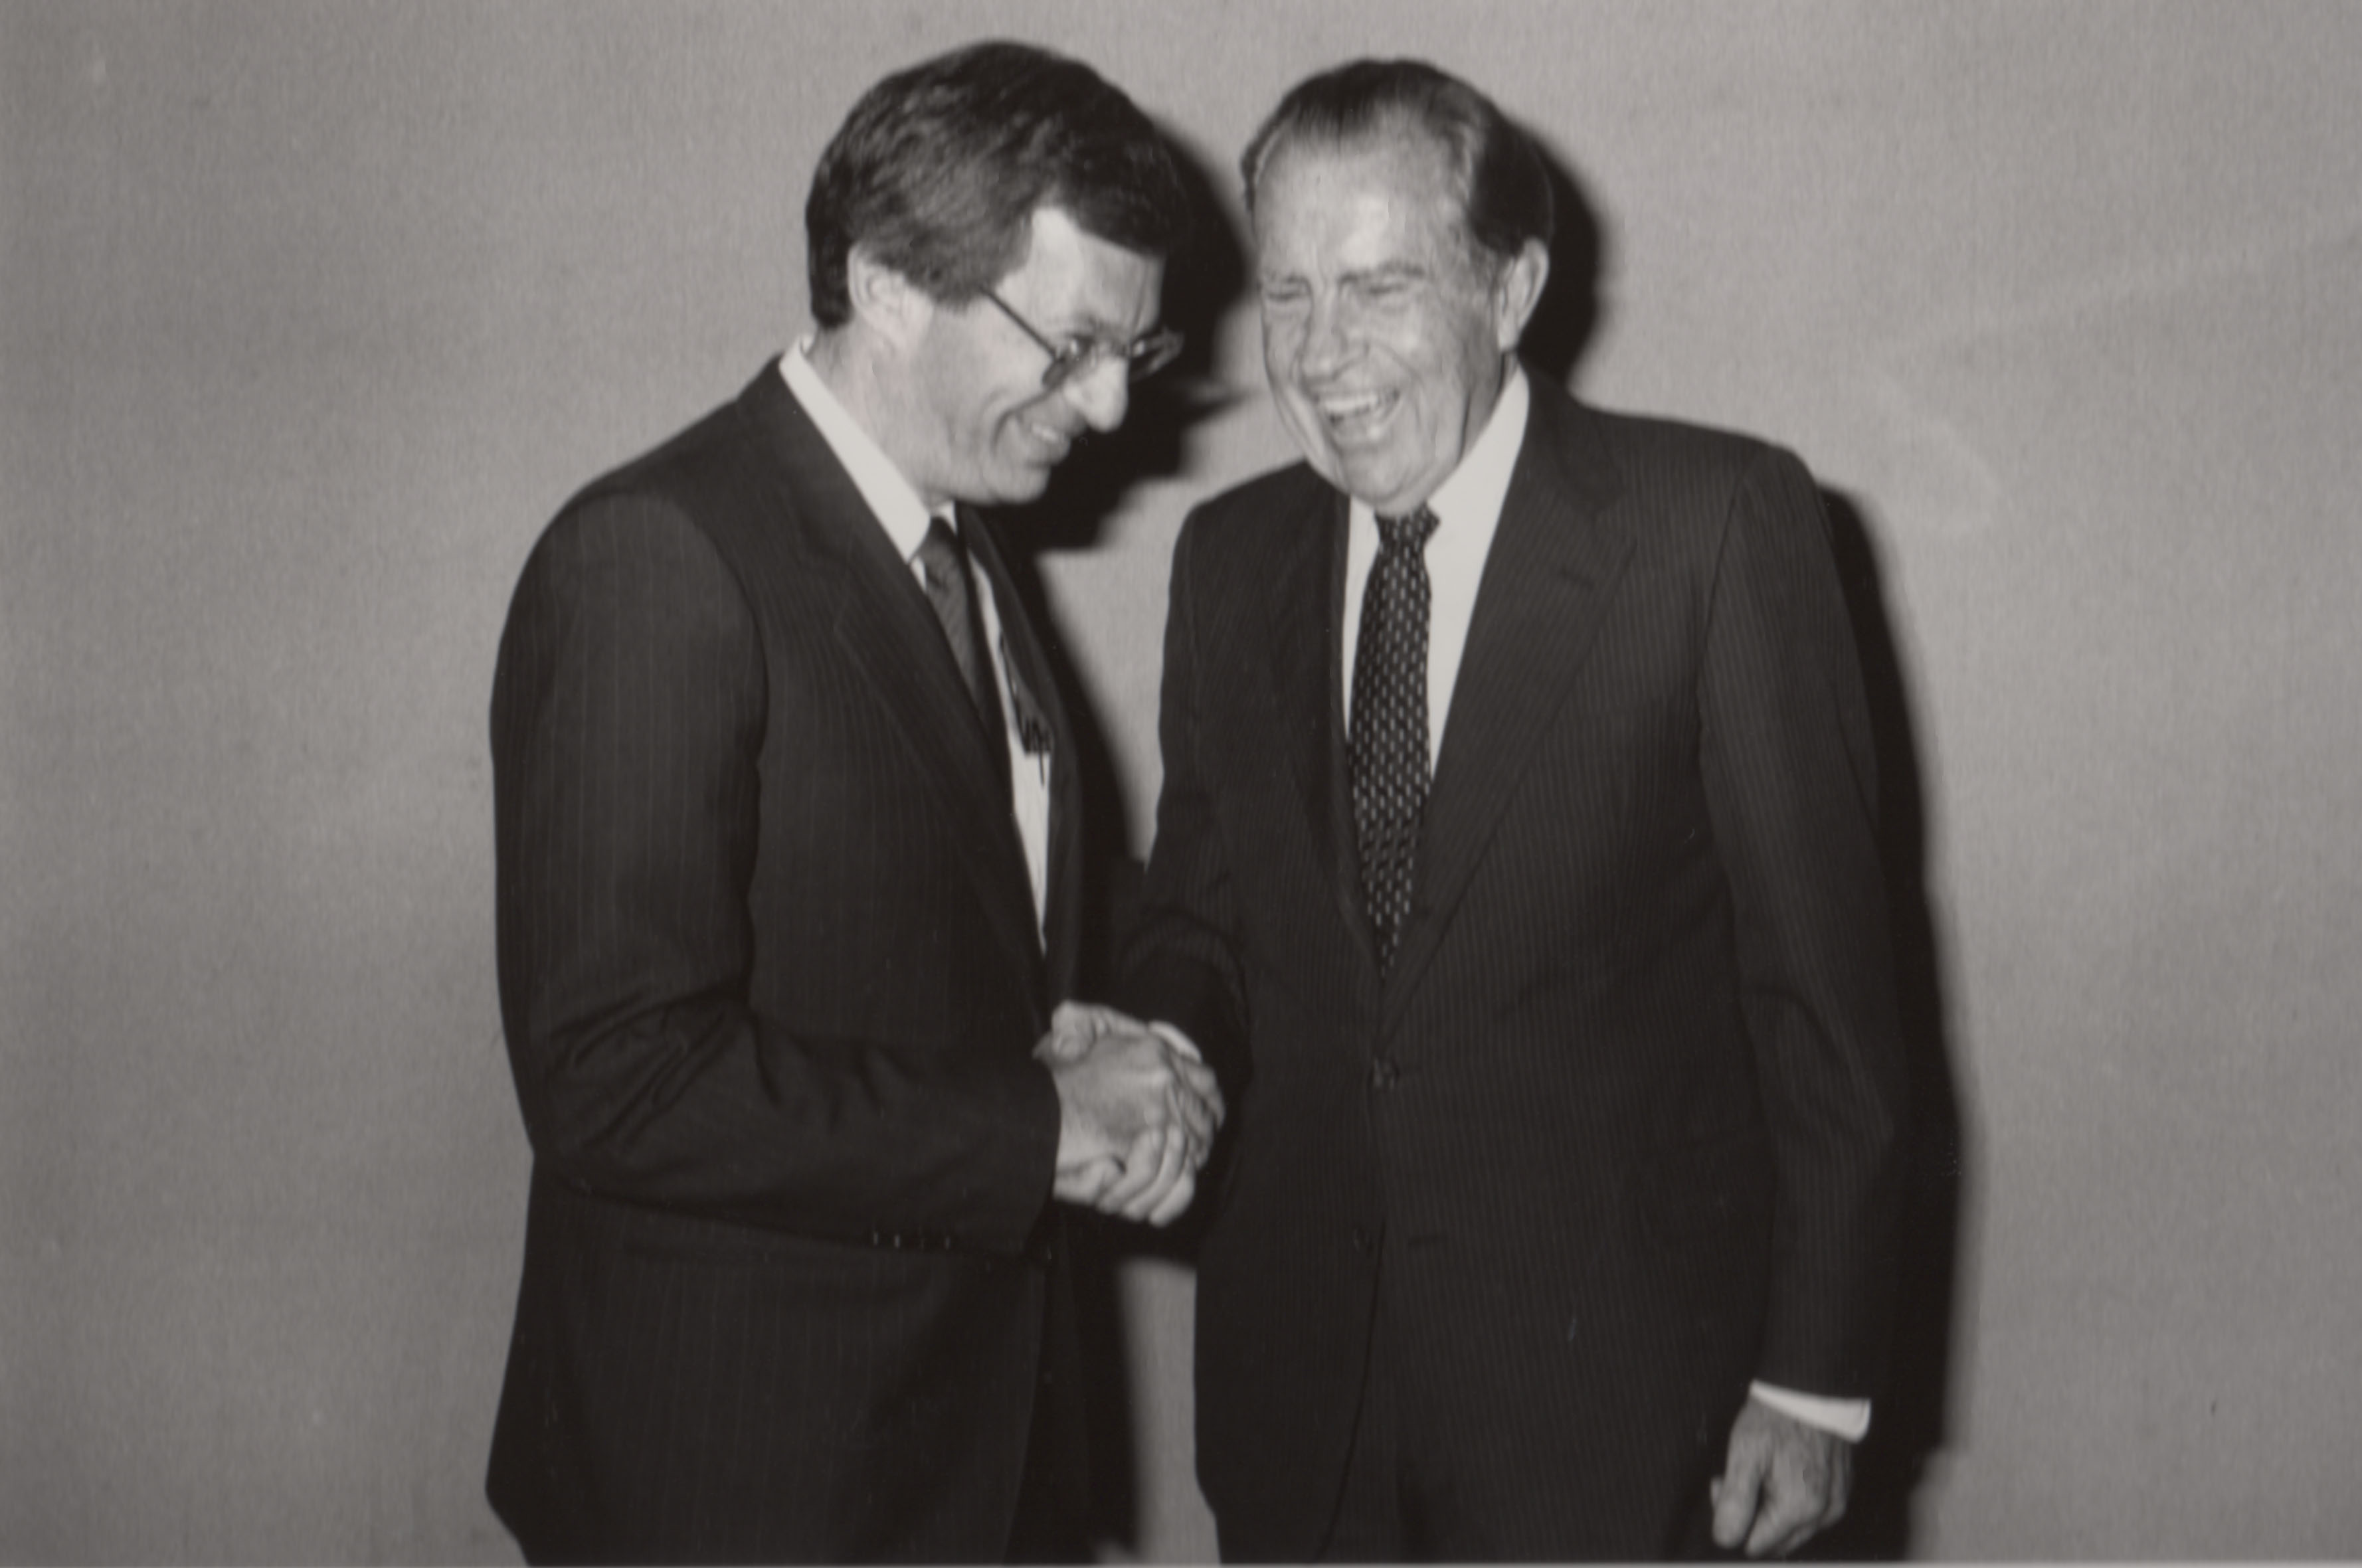 From Vincent DeVita's personal file: "With former president Richard Nixon. I asked him what he thought were the greatest achievements of his presidency. He said going to China and signing the National Cancer Act."